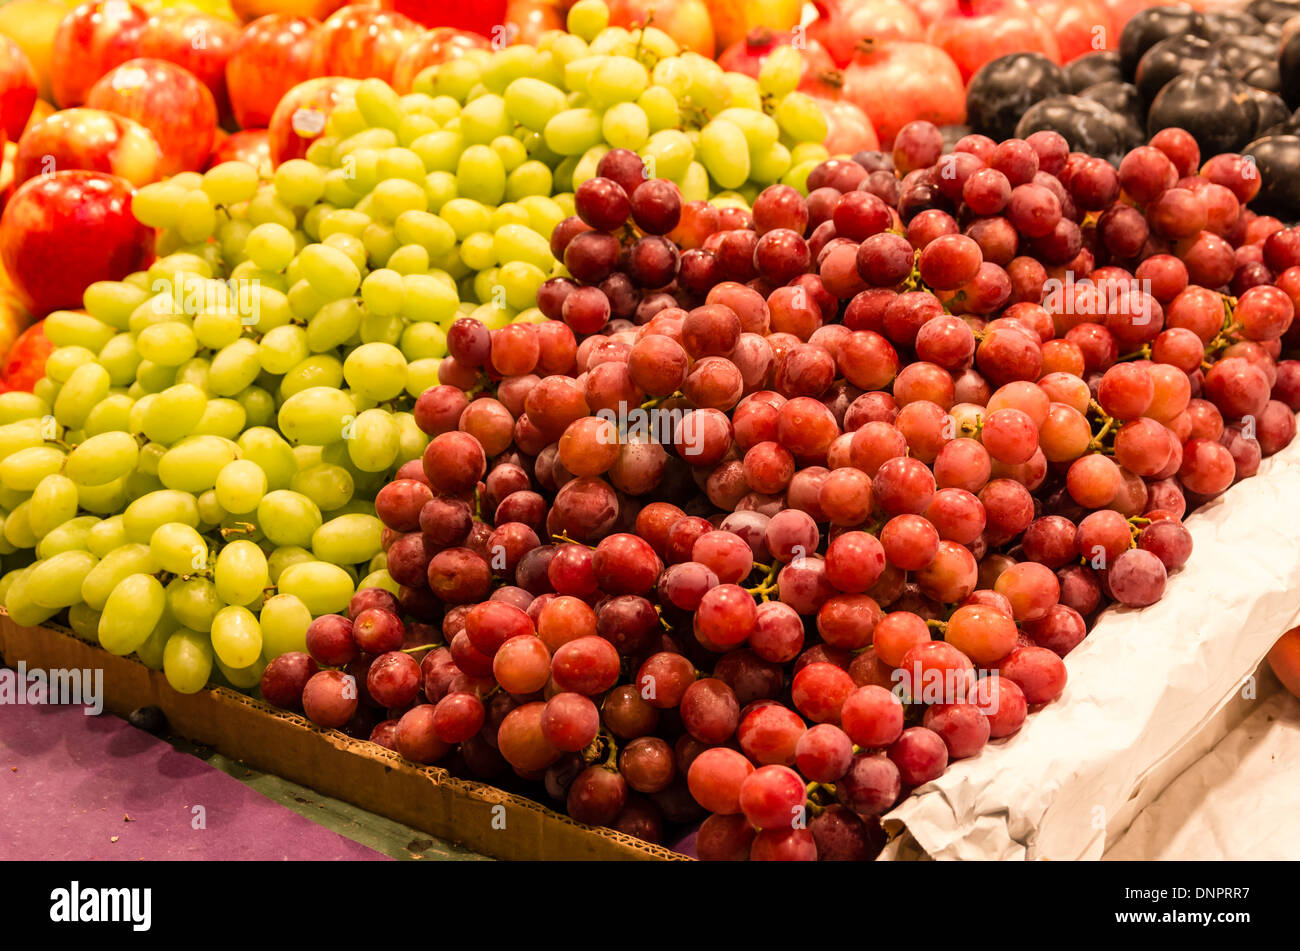 Green and red grapes at a produce vendor stall Pike Place Market Seattle, Washington, USA Stock Photo